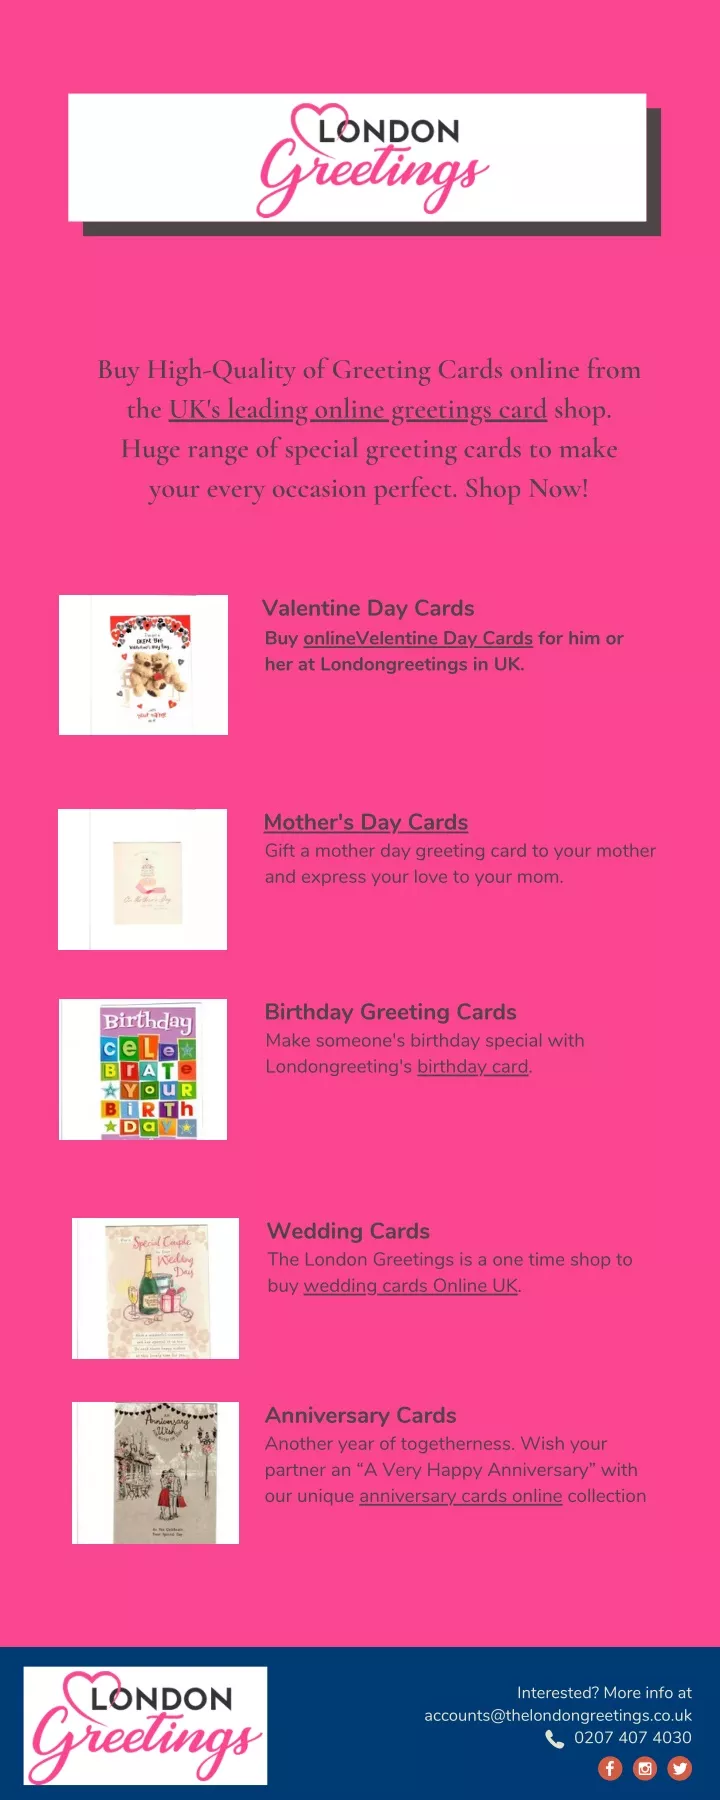 buy high quality of greeting cards online from